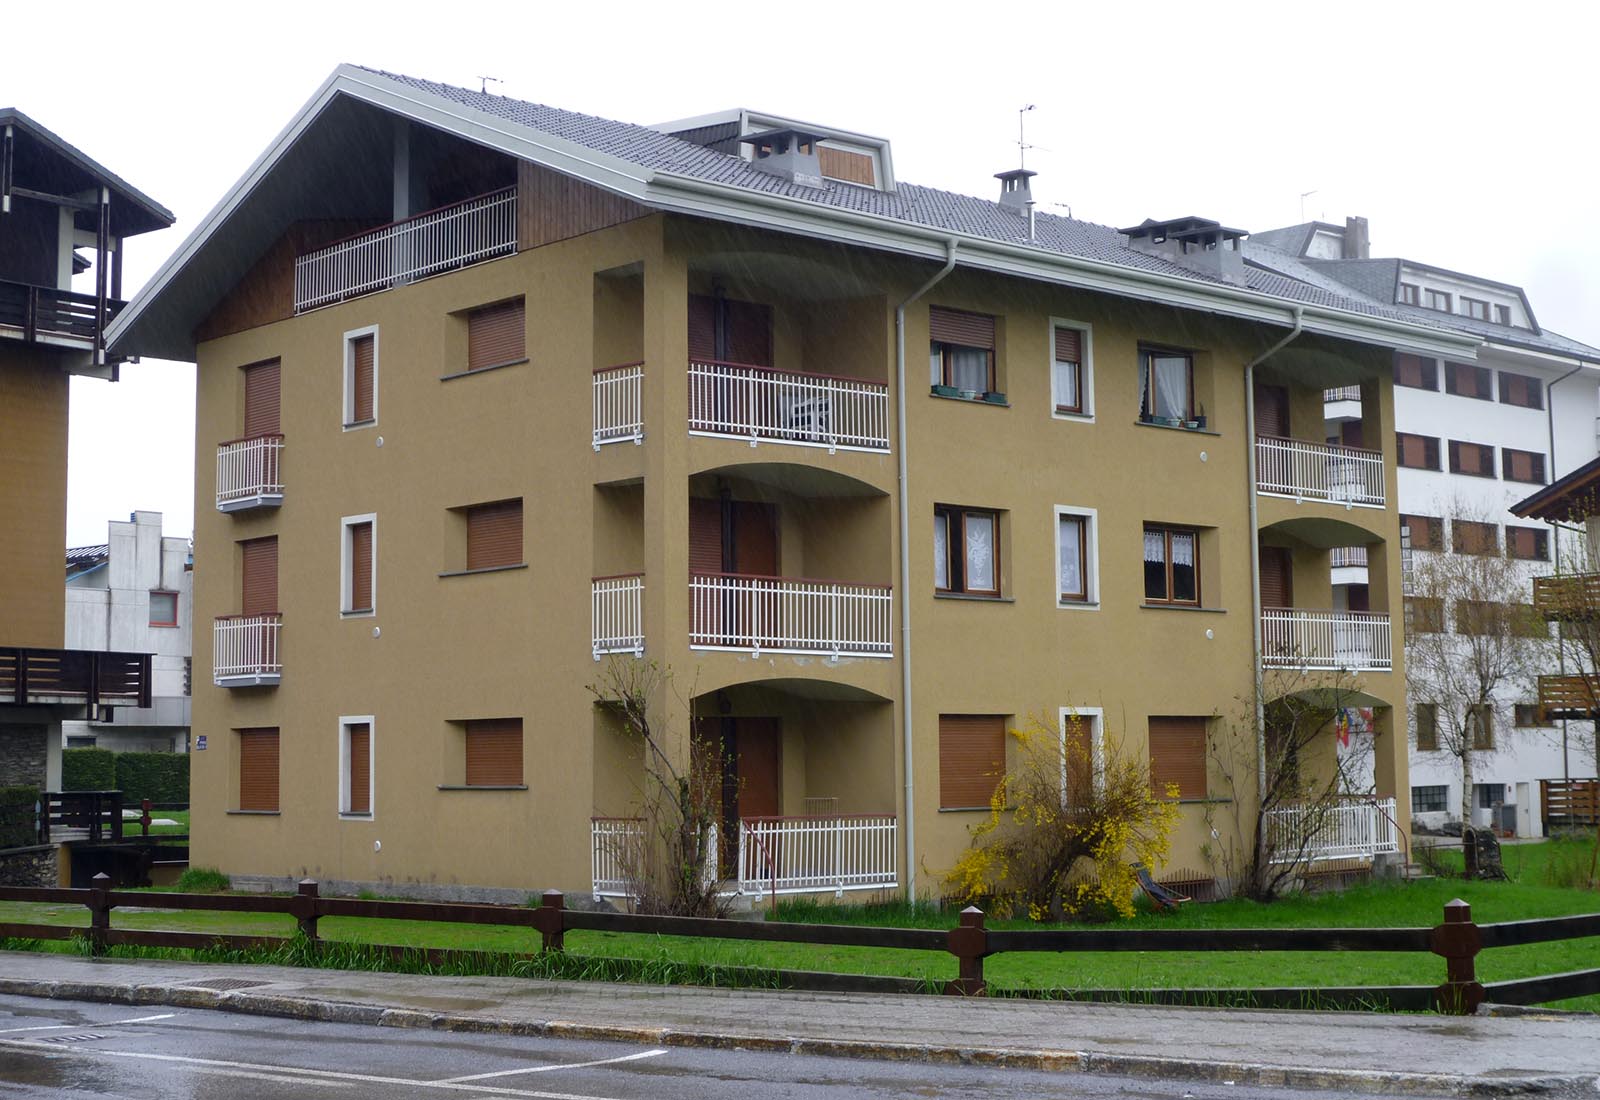 Residential building renovation in Aprica - View